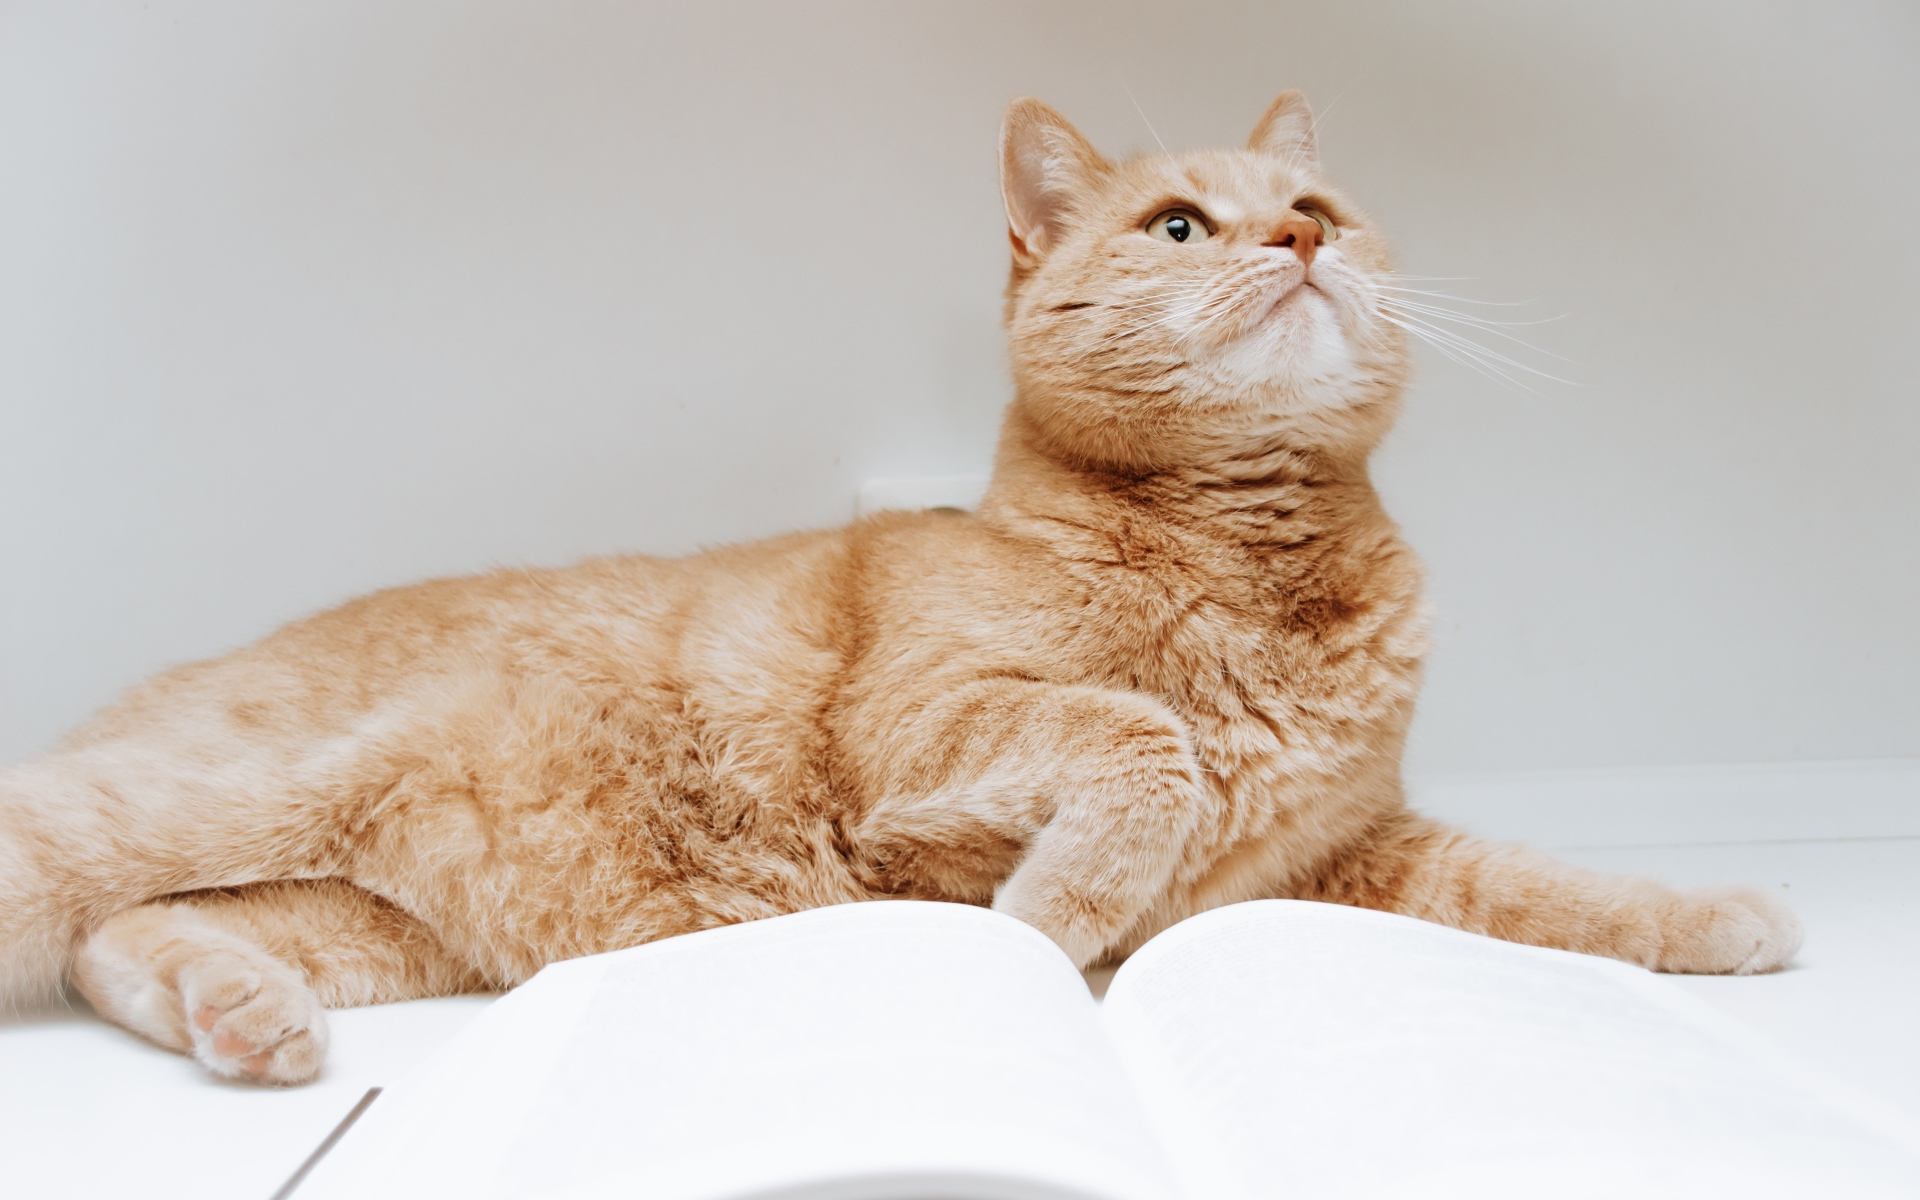 Red cat with book on gray background